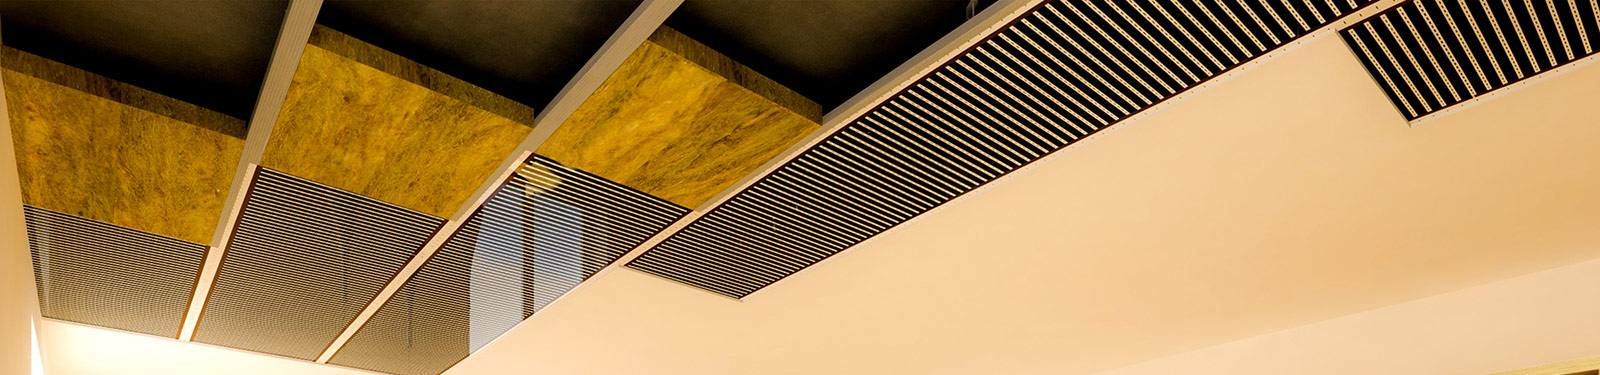 Ceiling Mounted Infrared Heating